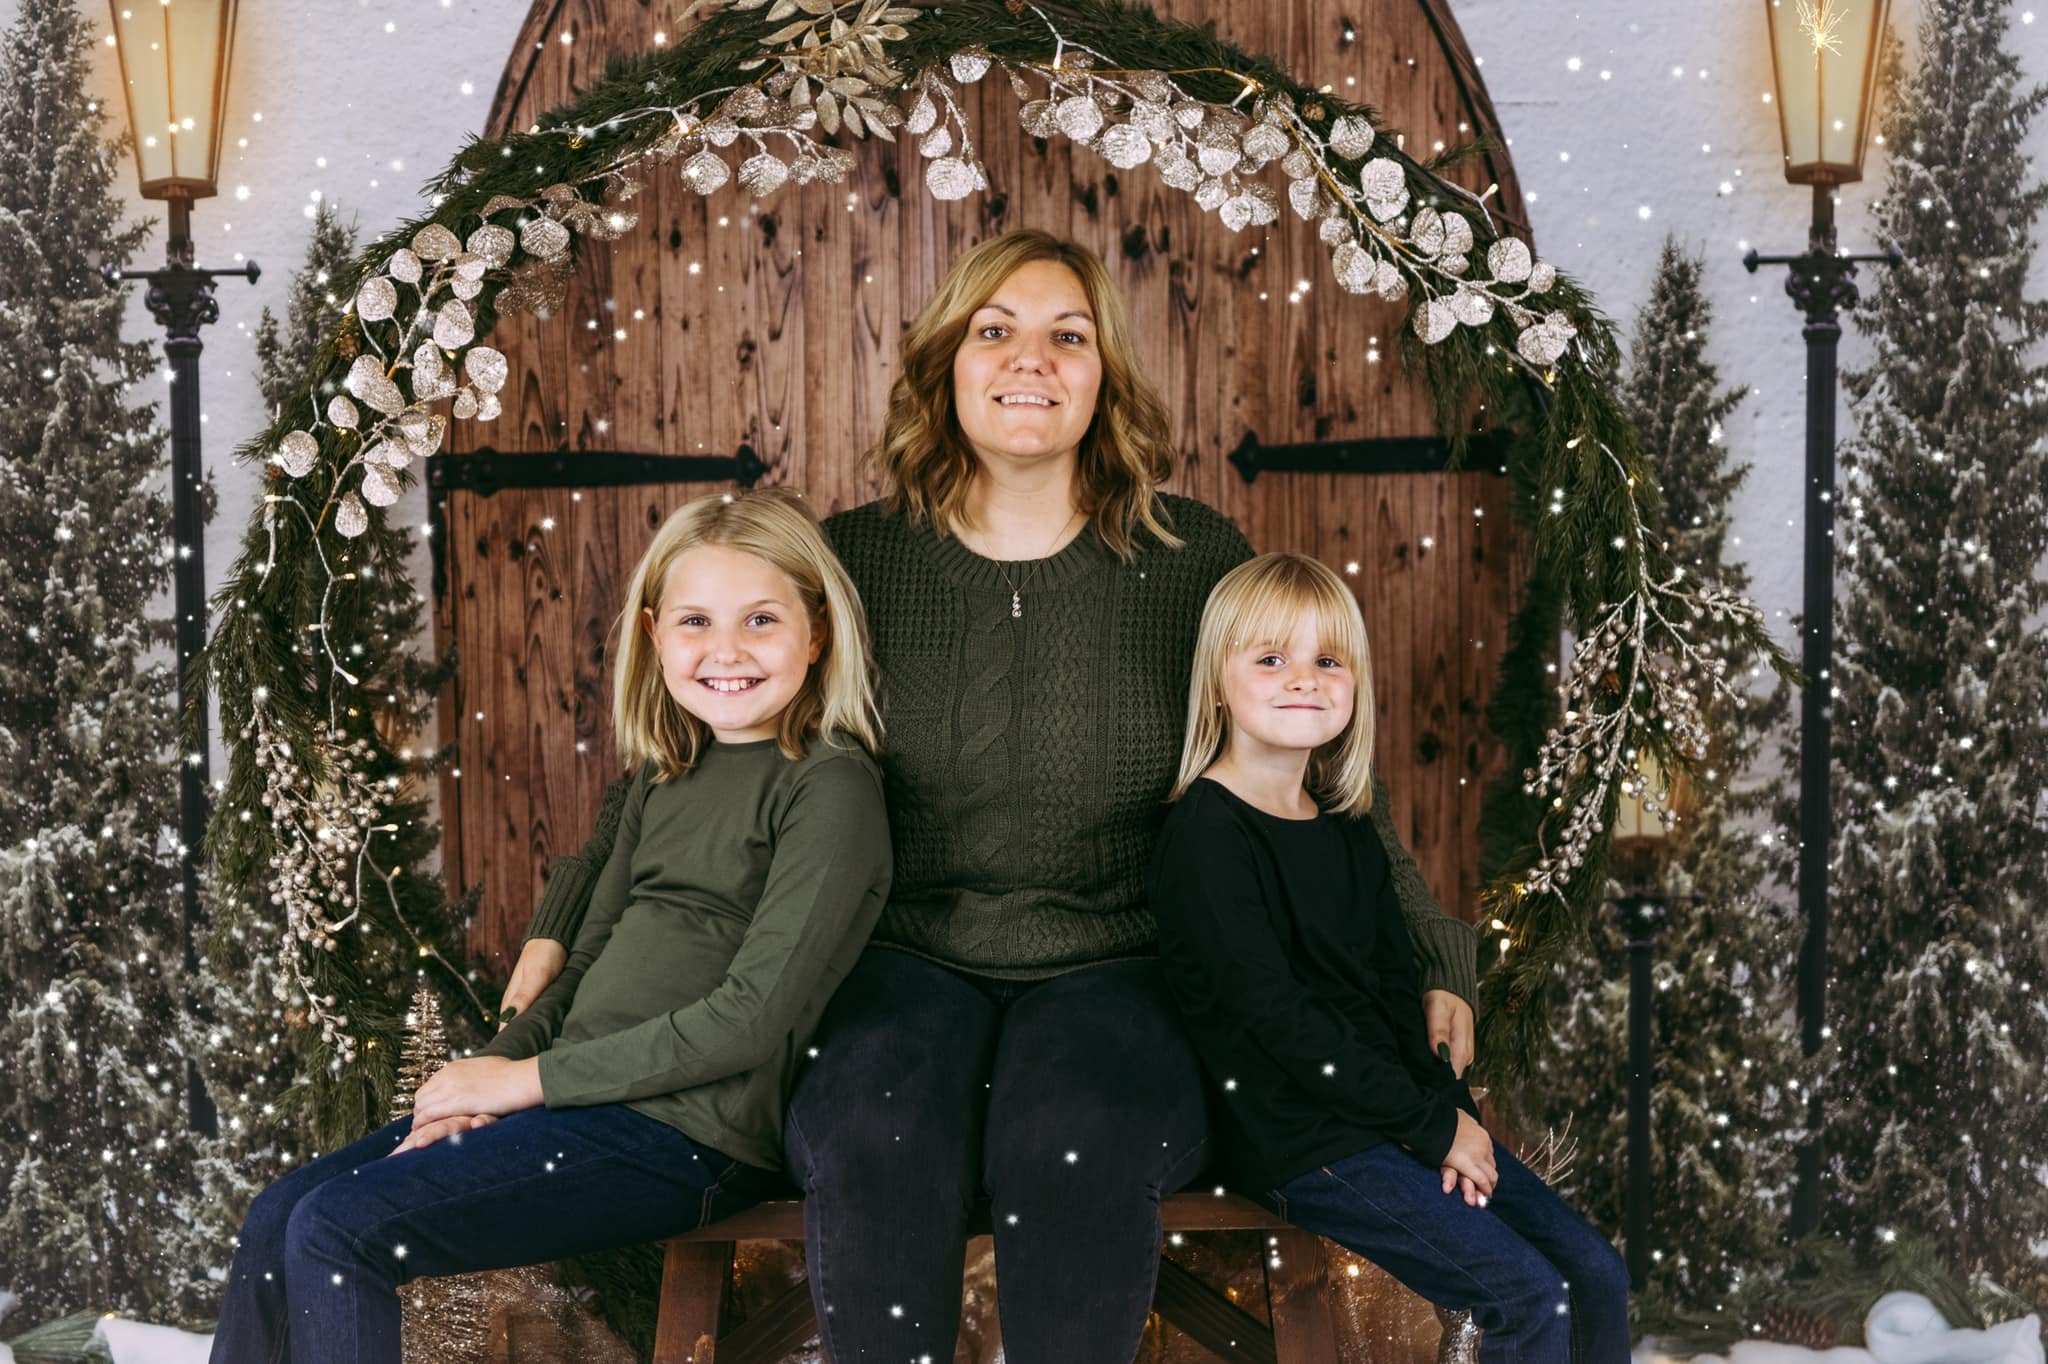 Kate Xmas Backdrop Door Lights Christmas Tree White Wall Designed By JS Photography